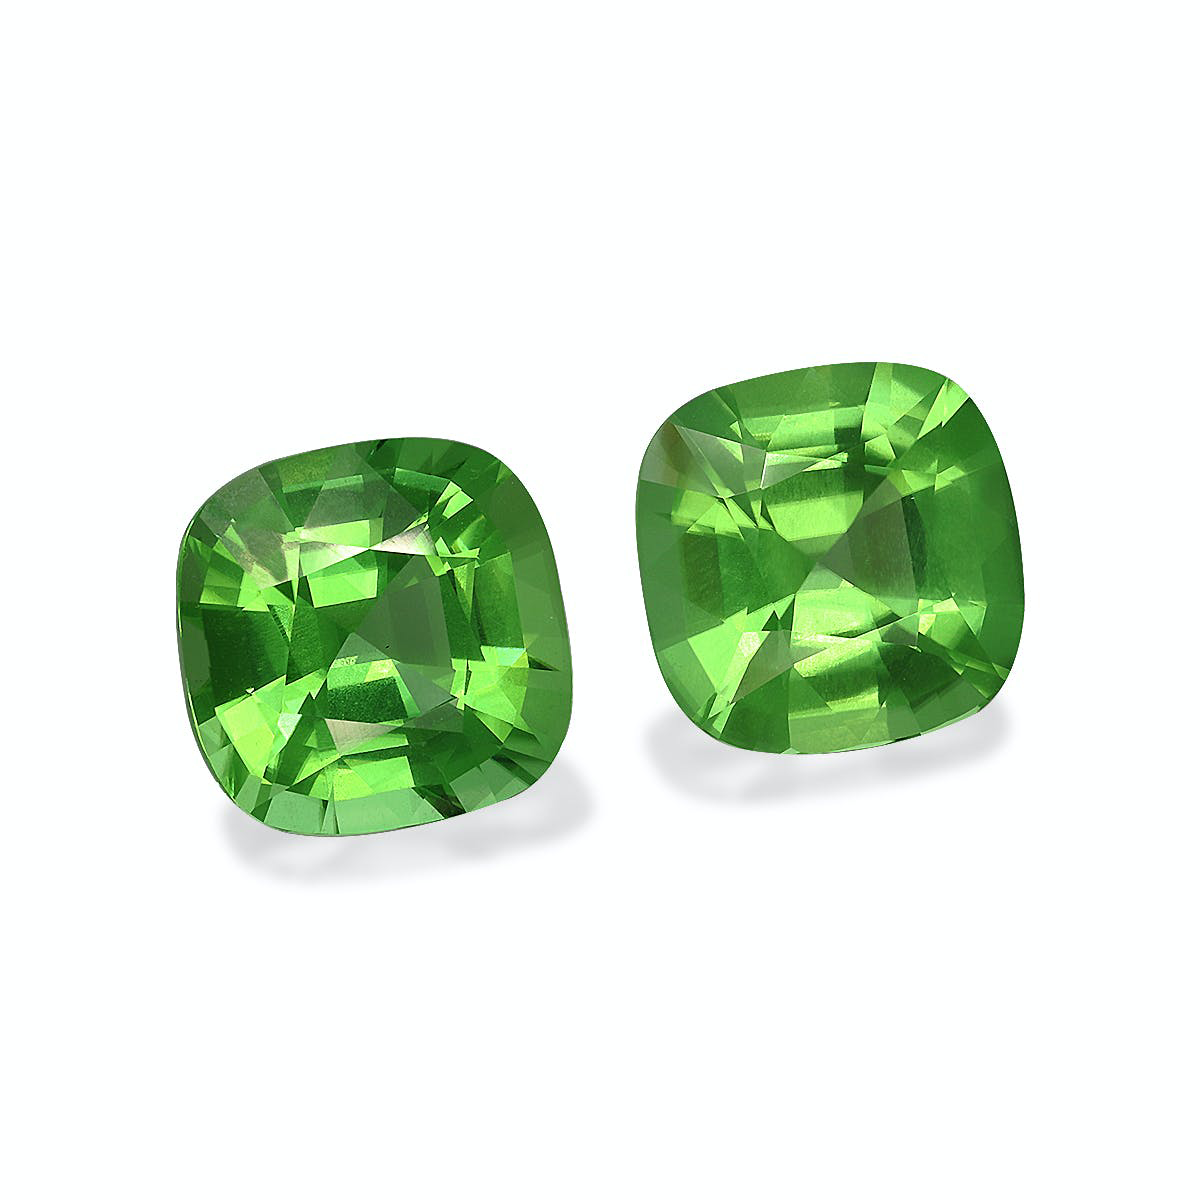 Picture of Pistachio Green Peridot 27.24ct - 14mm Pair (PD0233)